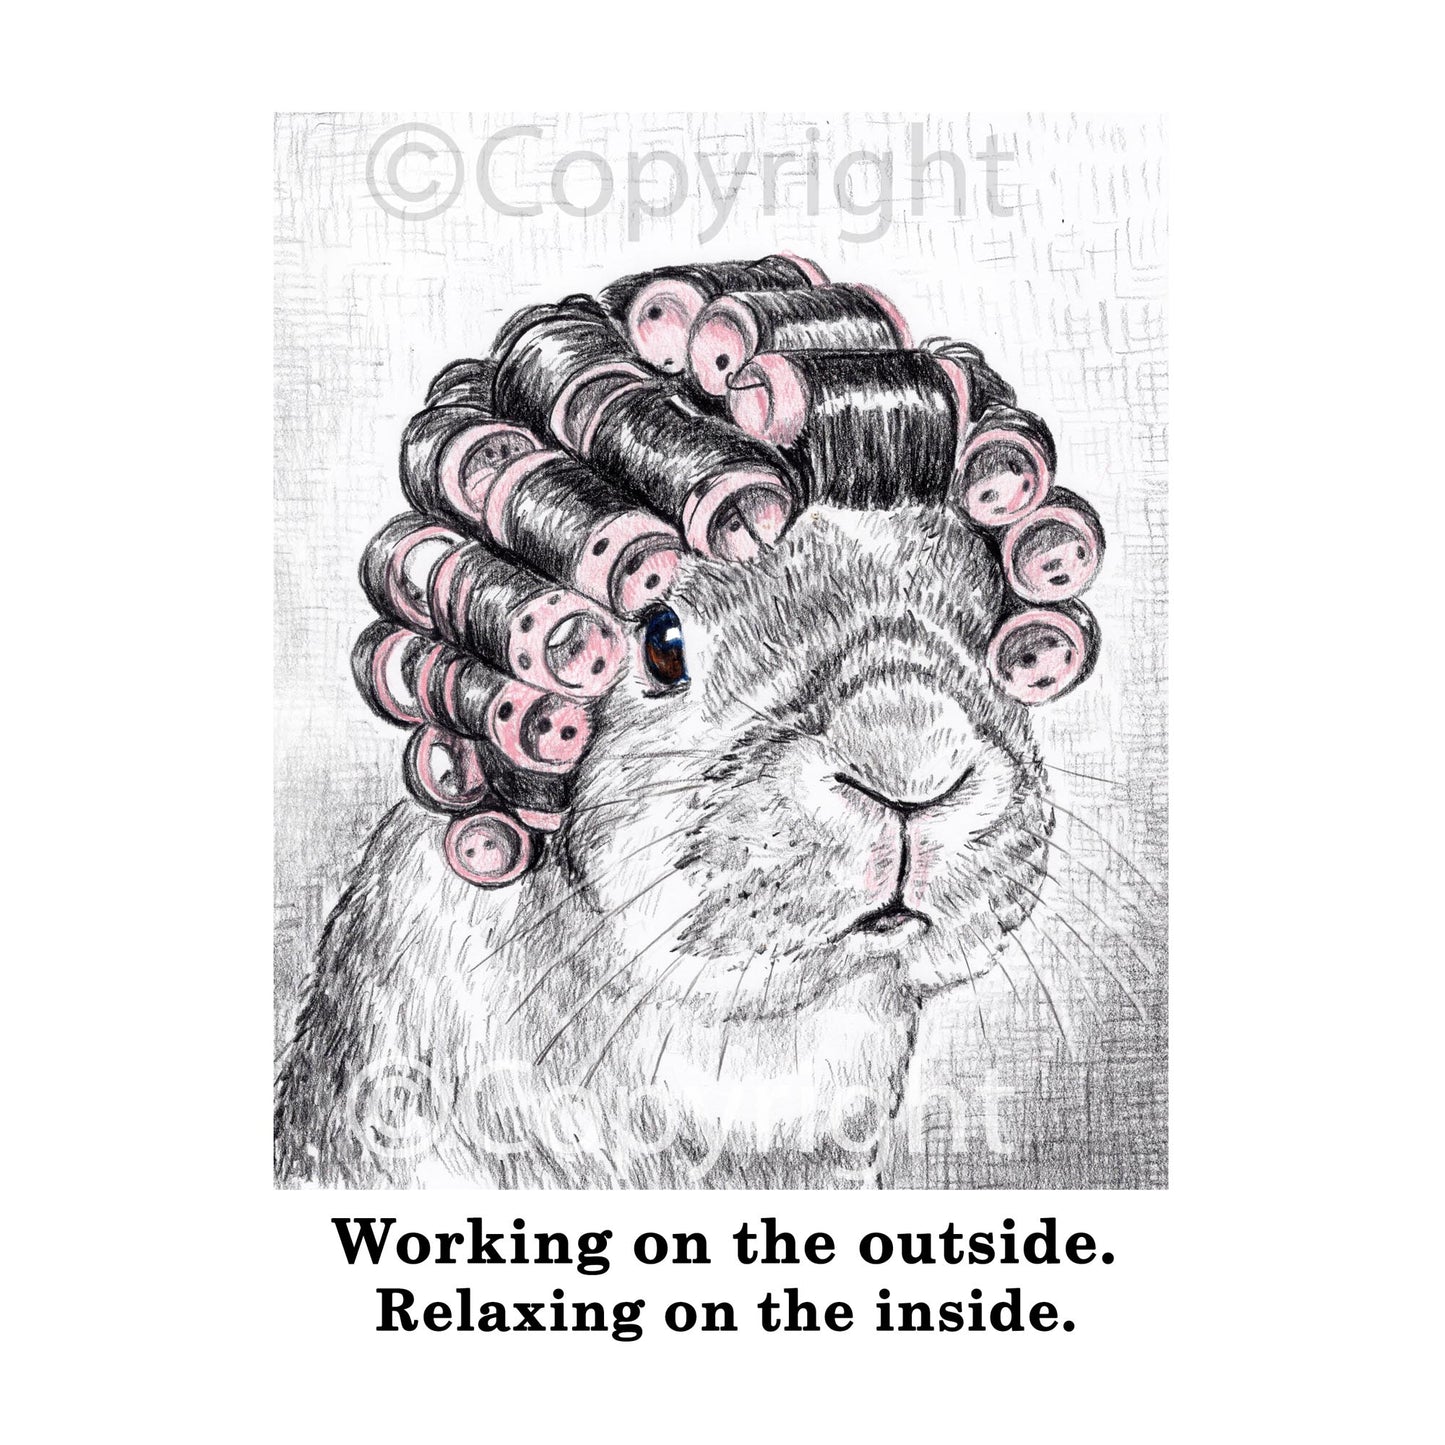 Black and White crayon drawing of a lop eared rabbit wearing hair curlers by Deidre Wicks